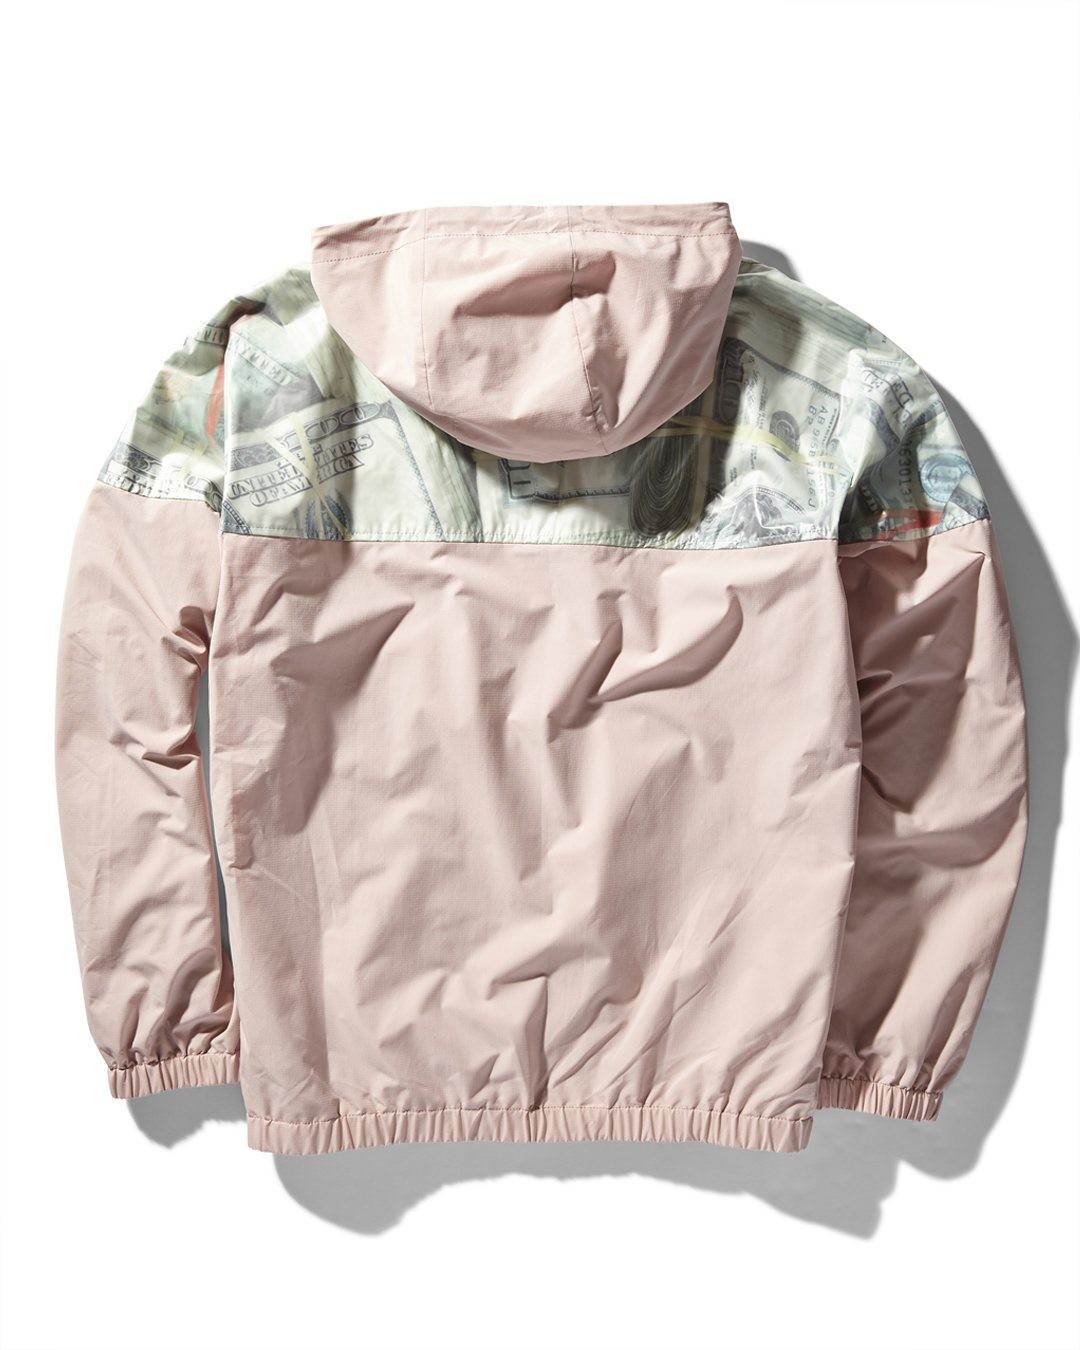 MONEY STACKS WINDBREAKER (PINK) - HIGH QUALITY AND INEXPENSIVE - MONEY STACKS WINDBREAKER (PINK) HIGH QUALITY AND INEXPENSIVE-01-2